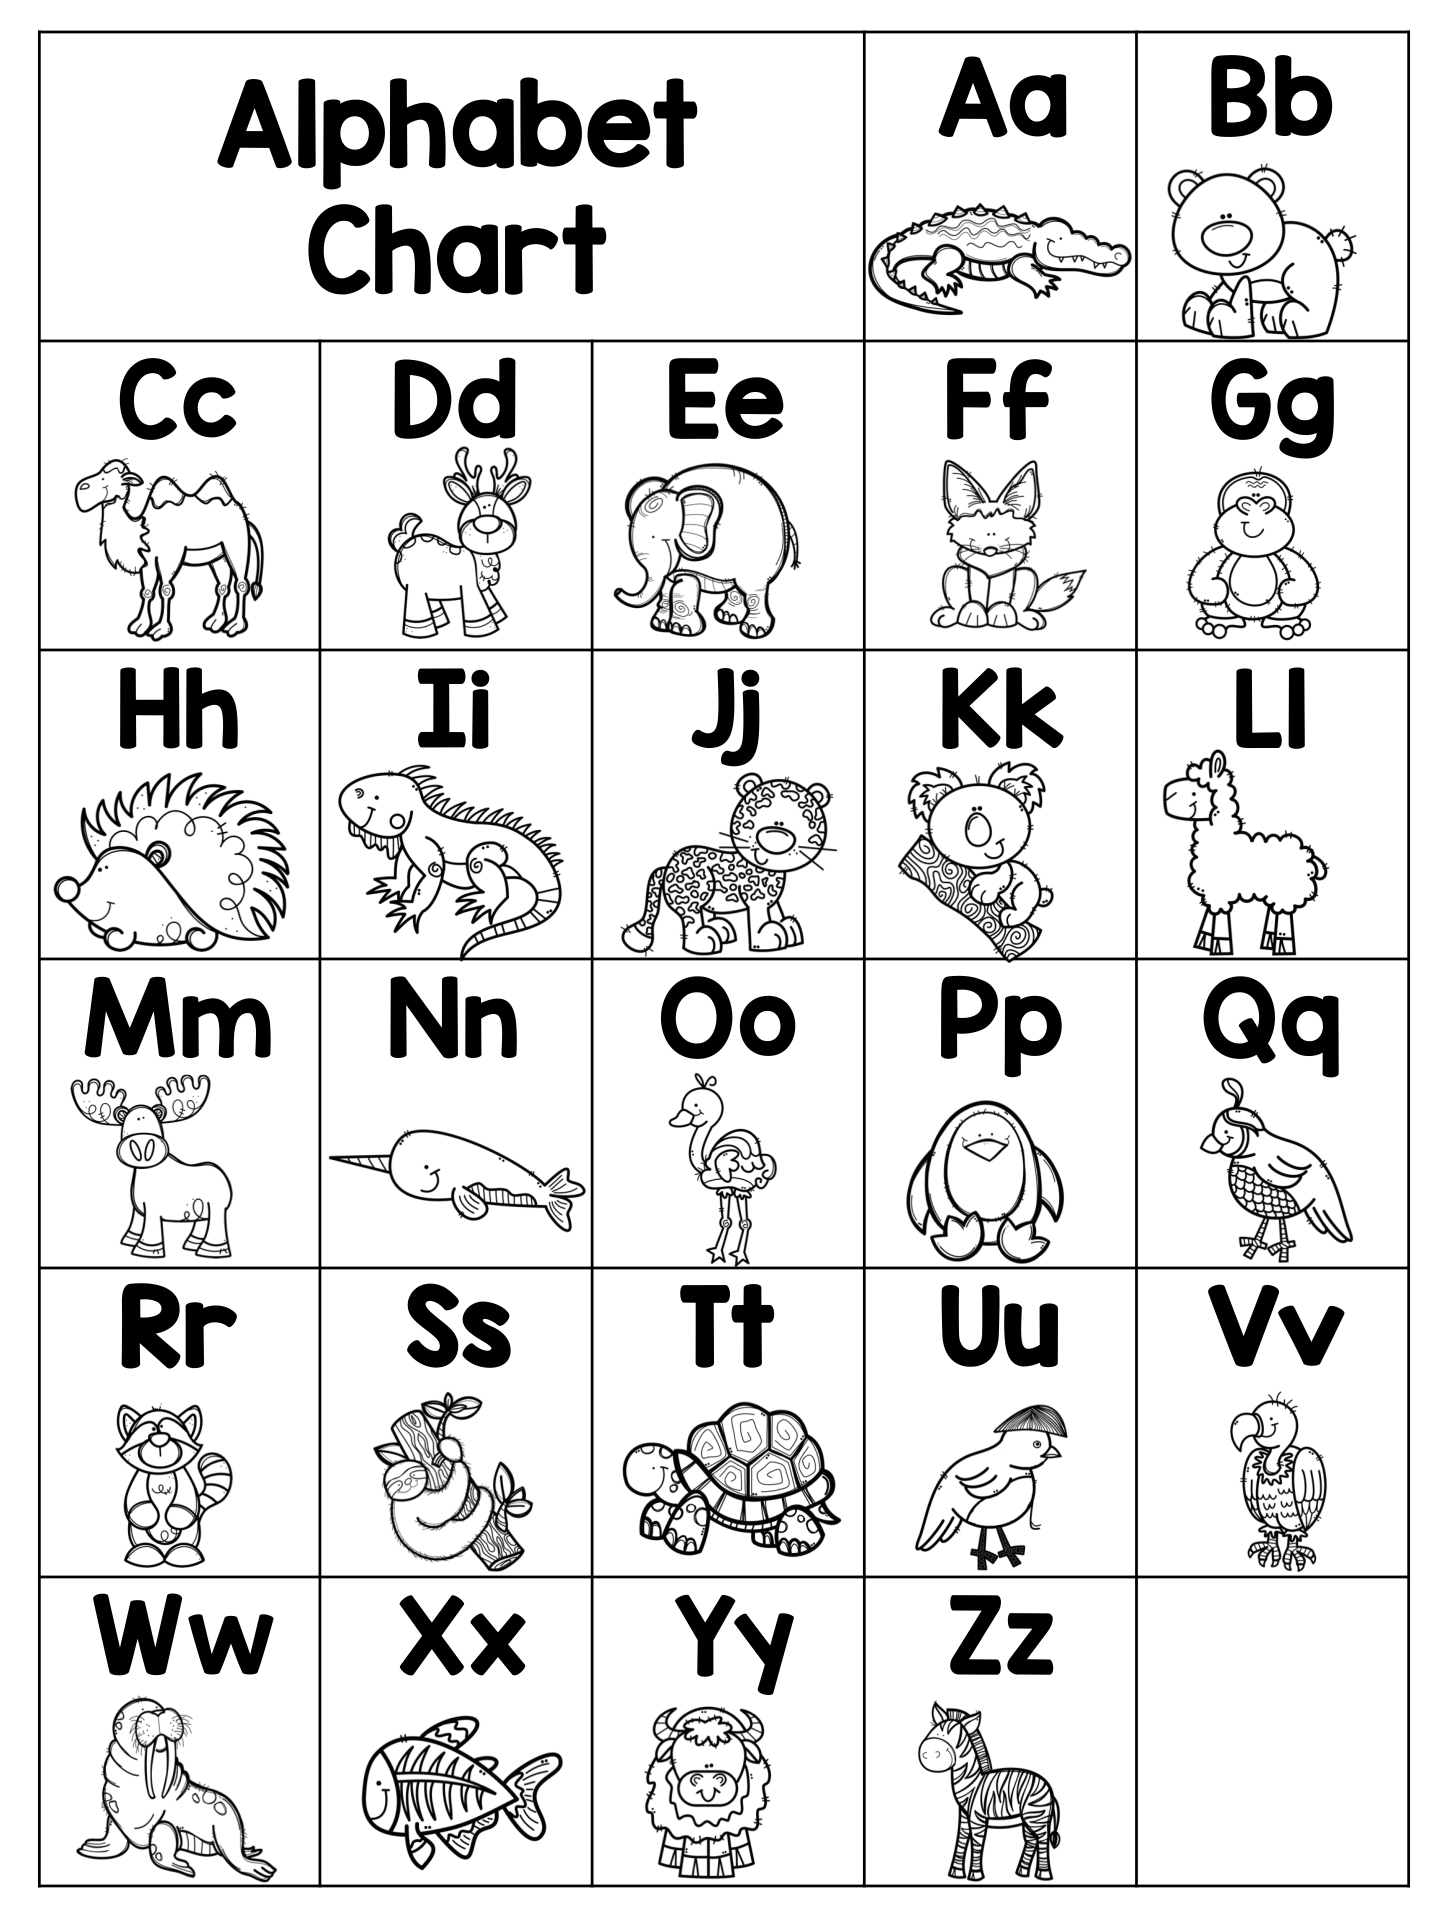 7 Best Images of Printable Letter Chart - Free Printable Alphabet Chart ...